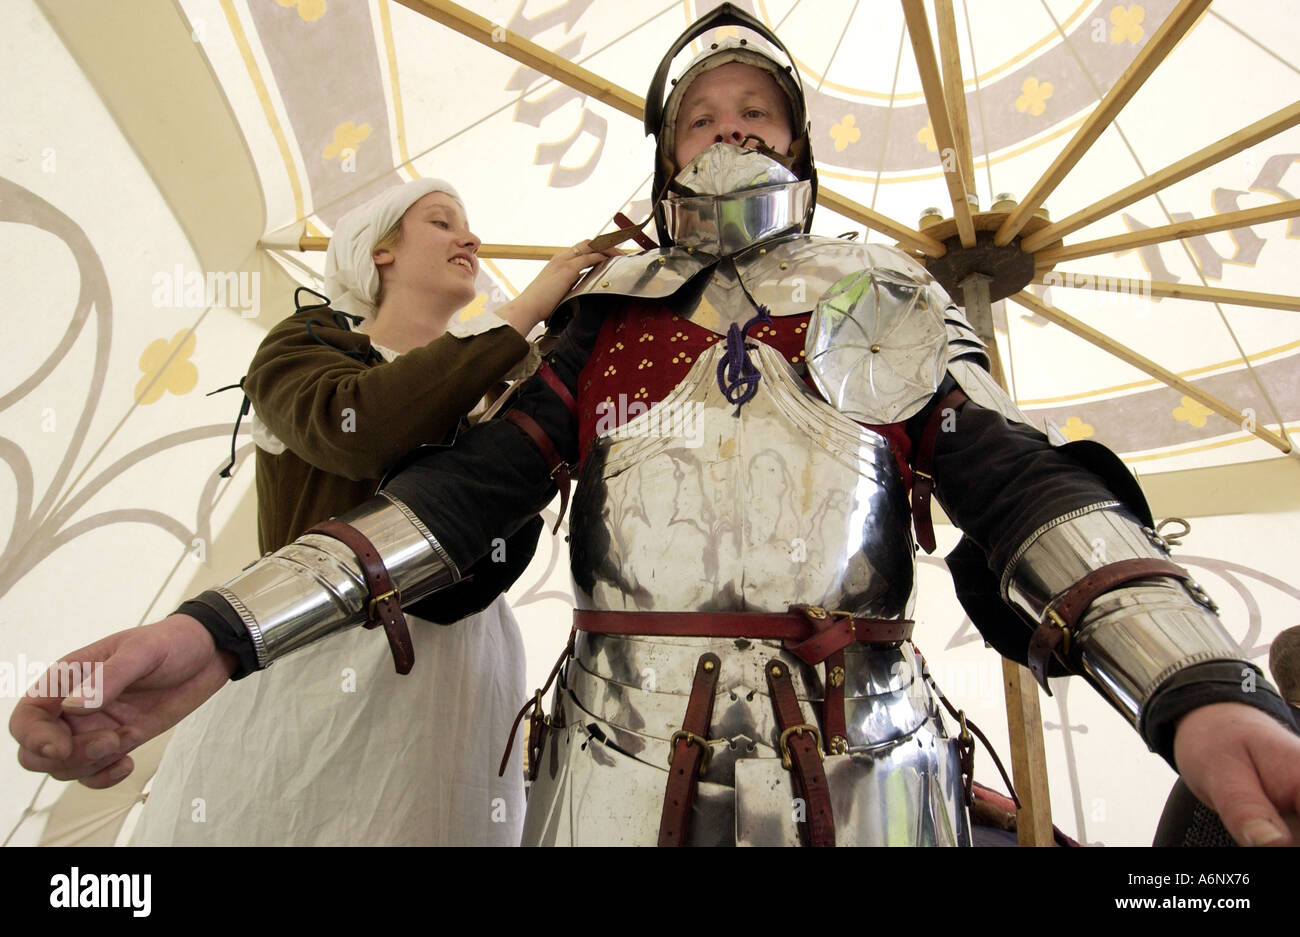 Fighting old battles. A serving wench helps dress a brave knight in his armour as part of a medieval tournament. Stock Photo